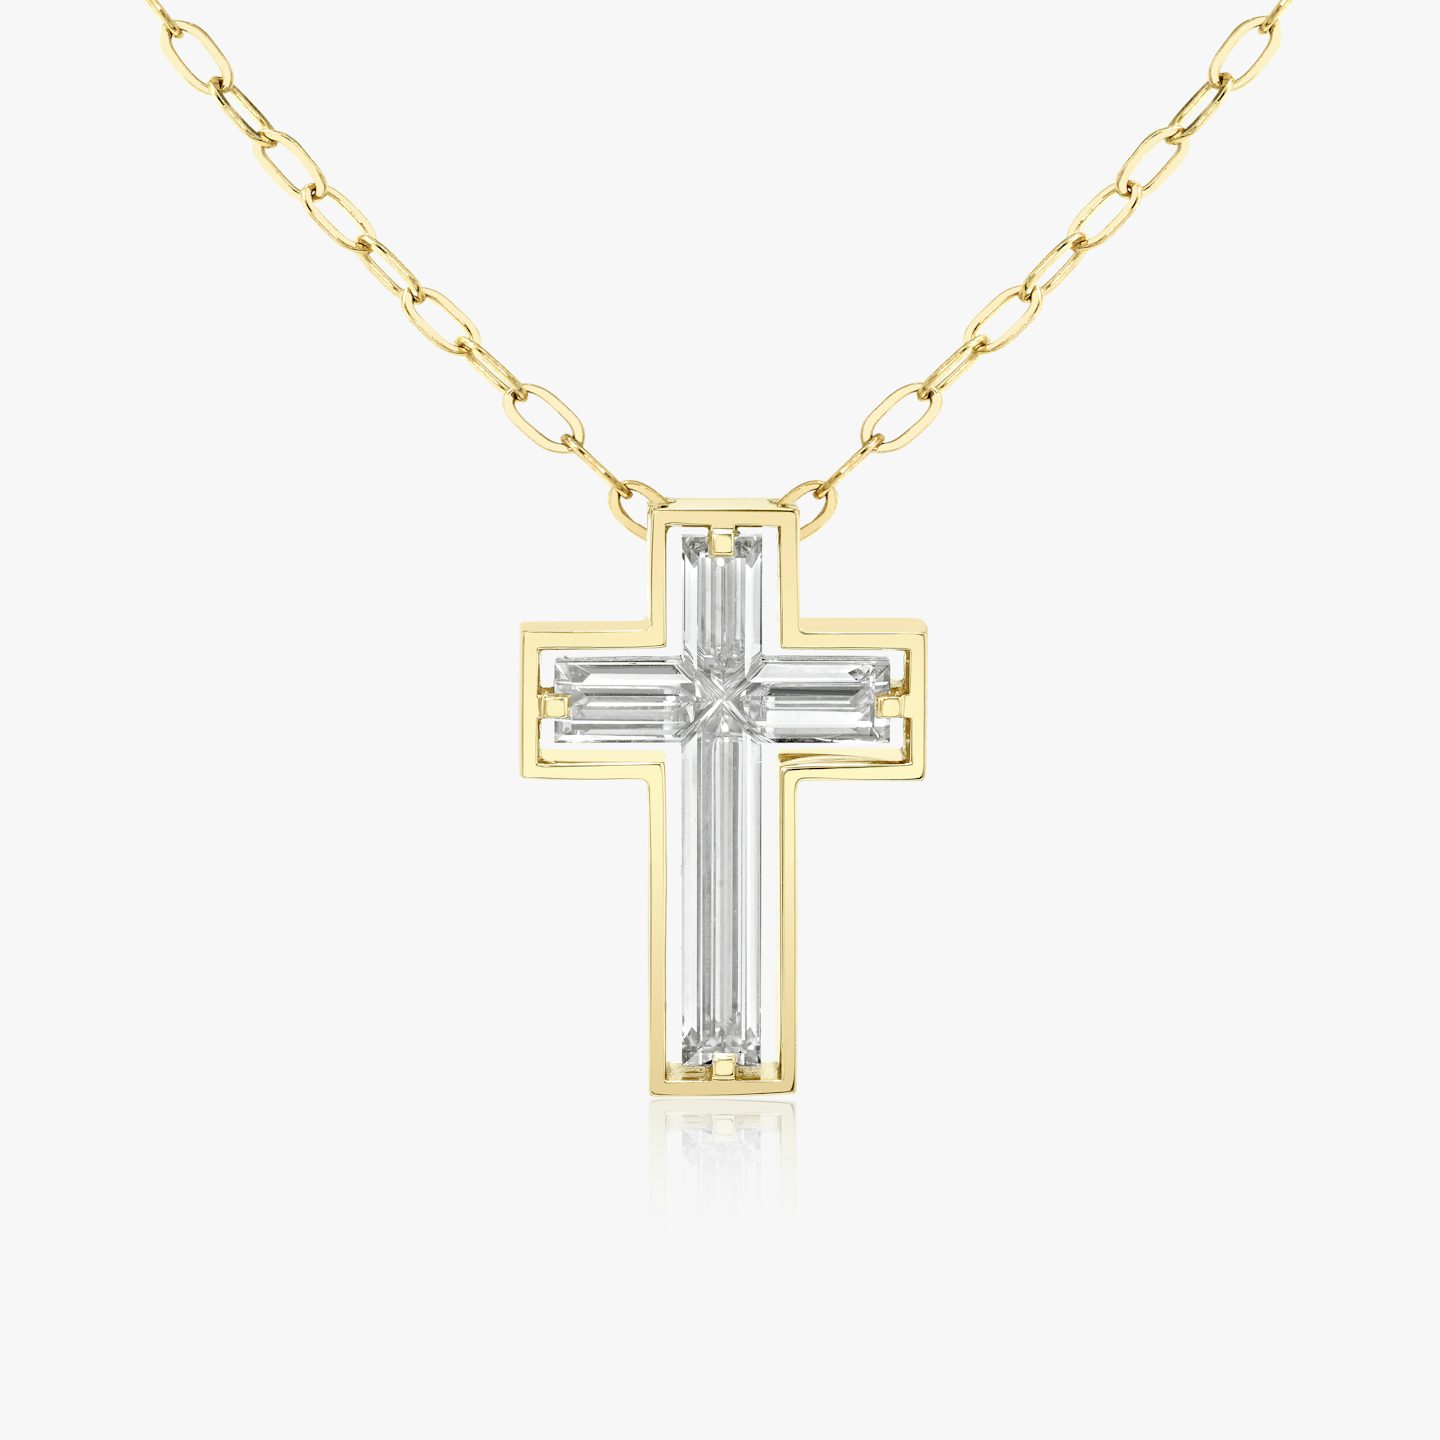 Suspended Solitaire Cross | 18k | 18k Yellow Gold | Chain length: 18-20